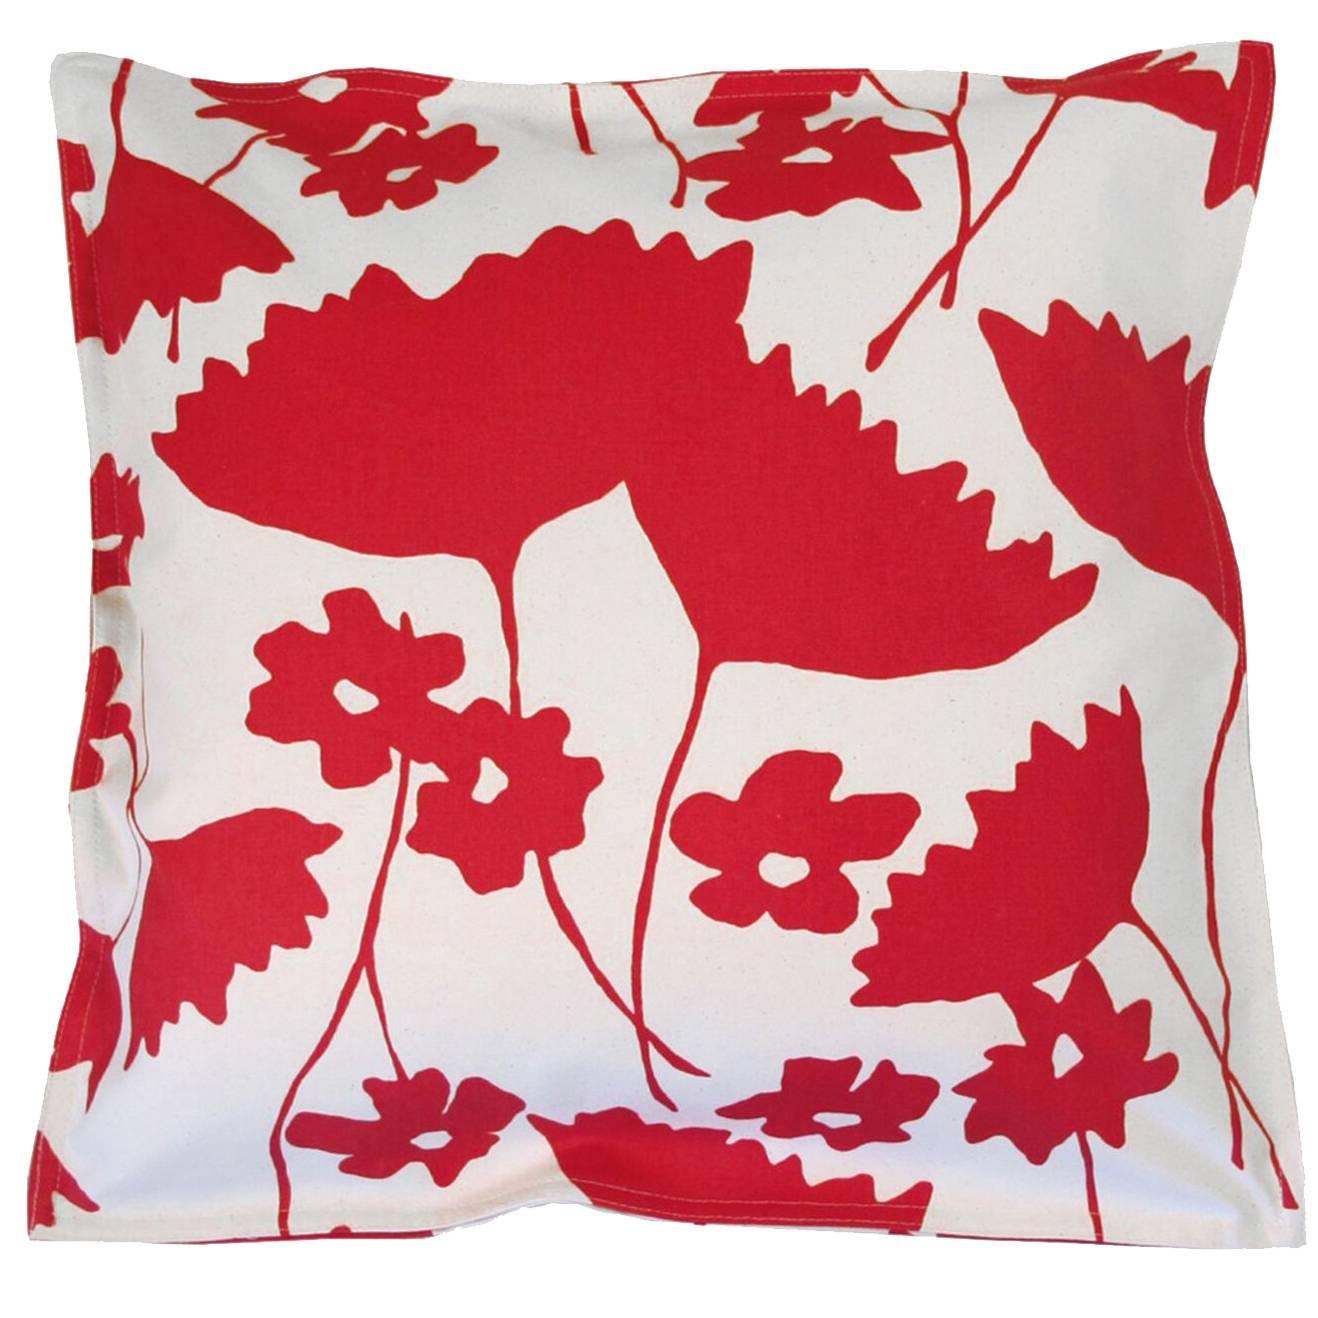 Scarlet Cosmos on Cotton Canvas Pillow For Sale